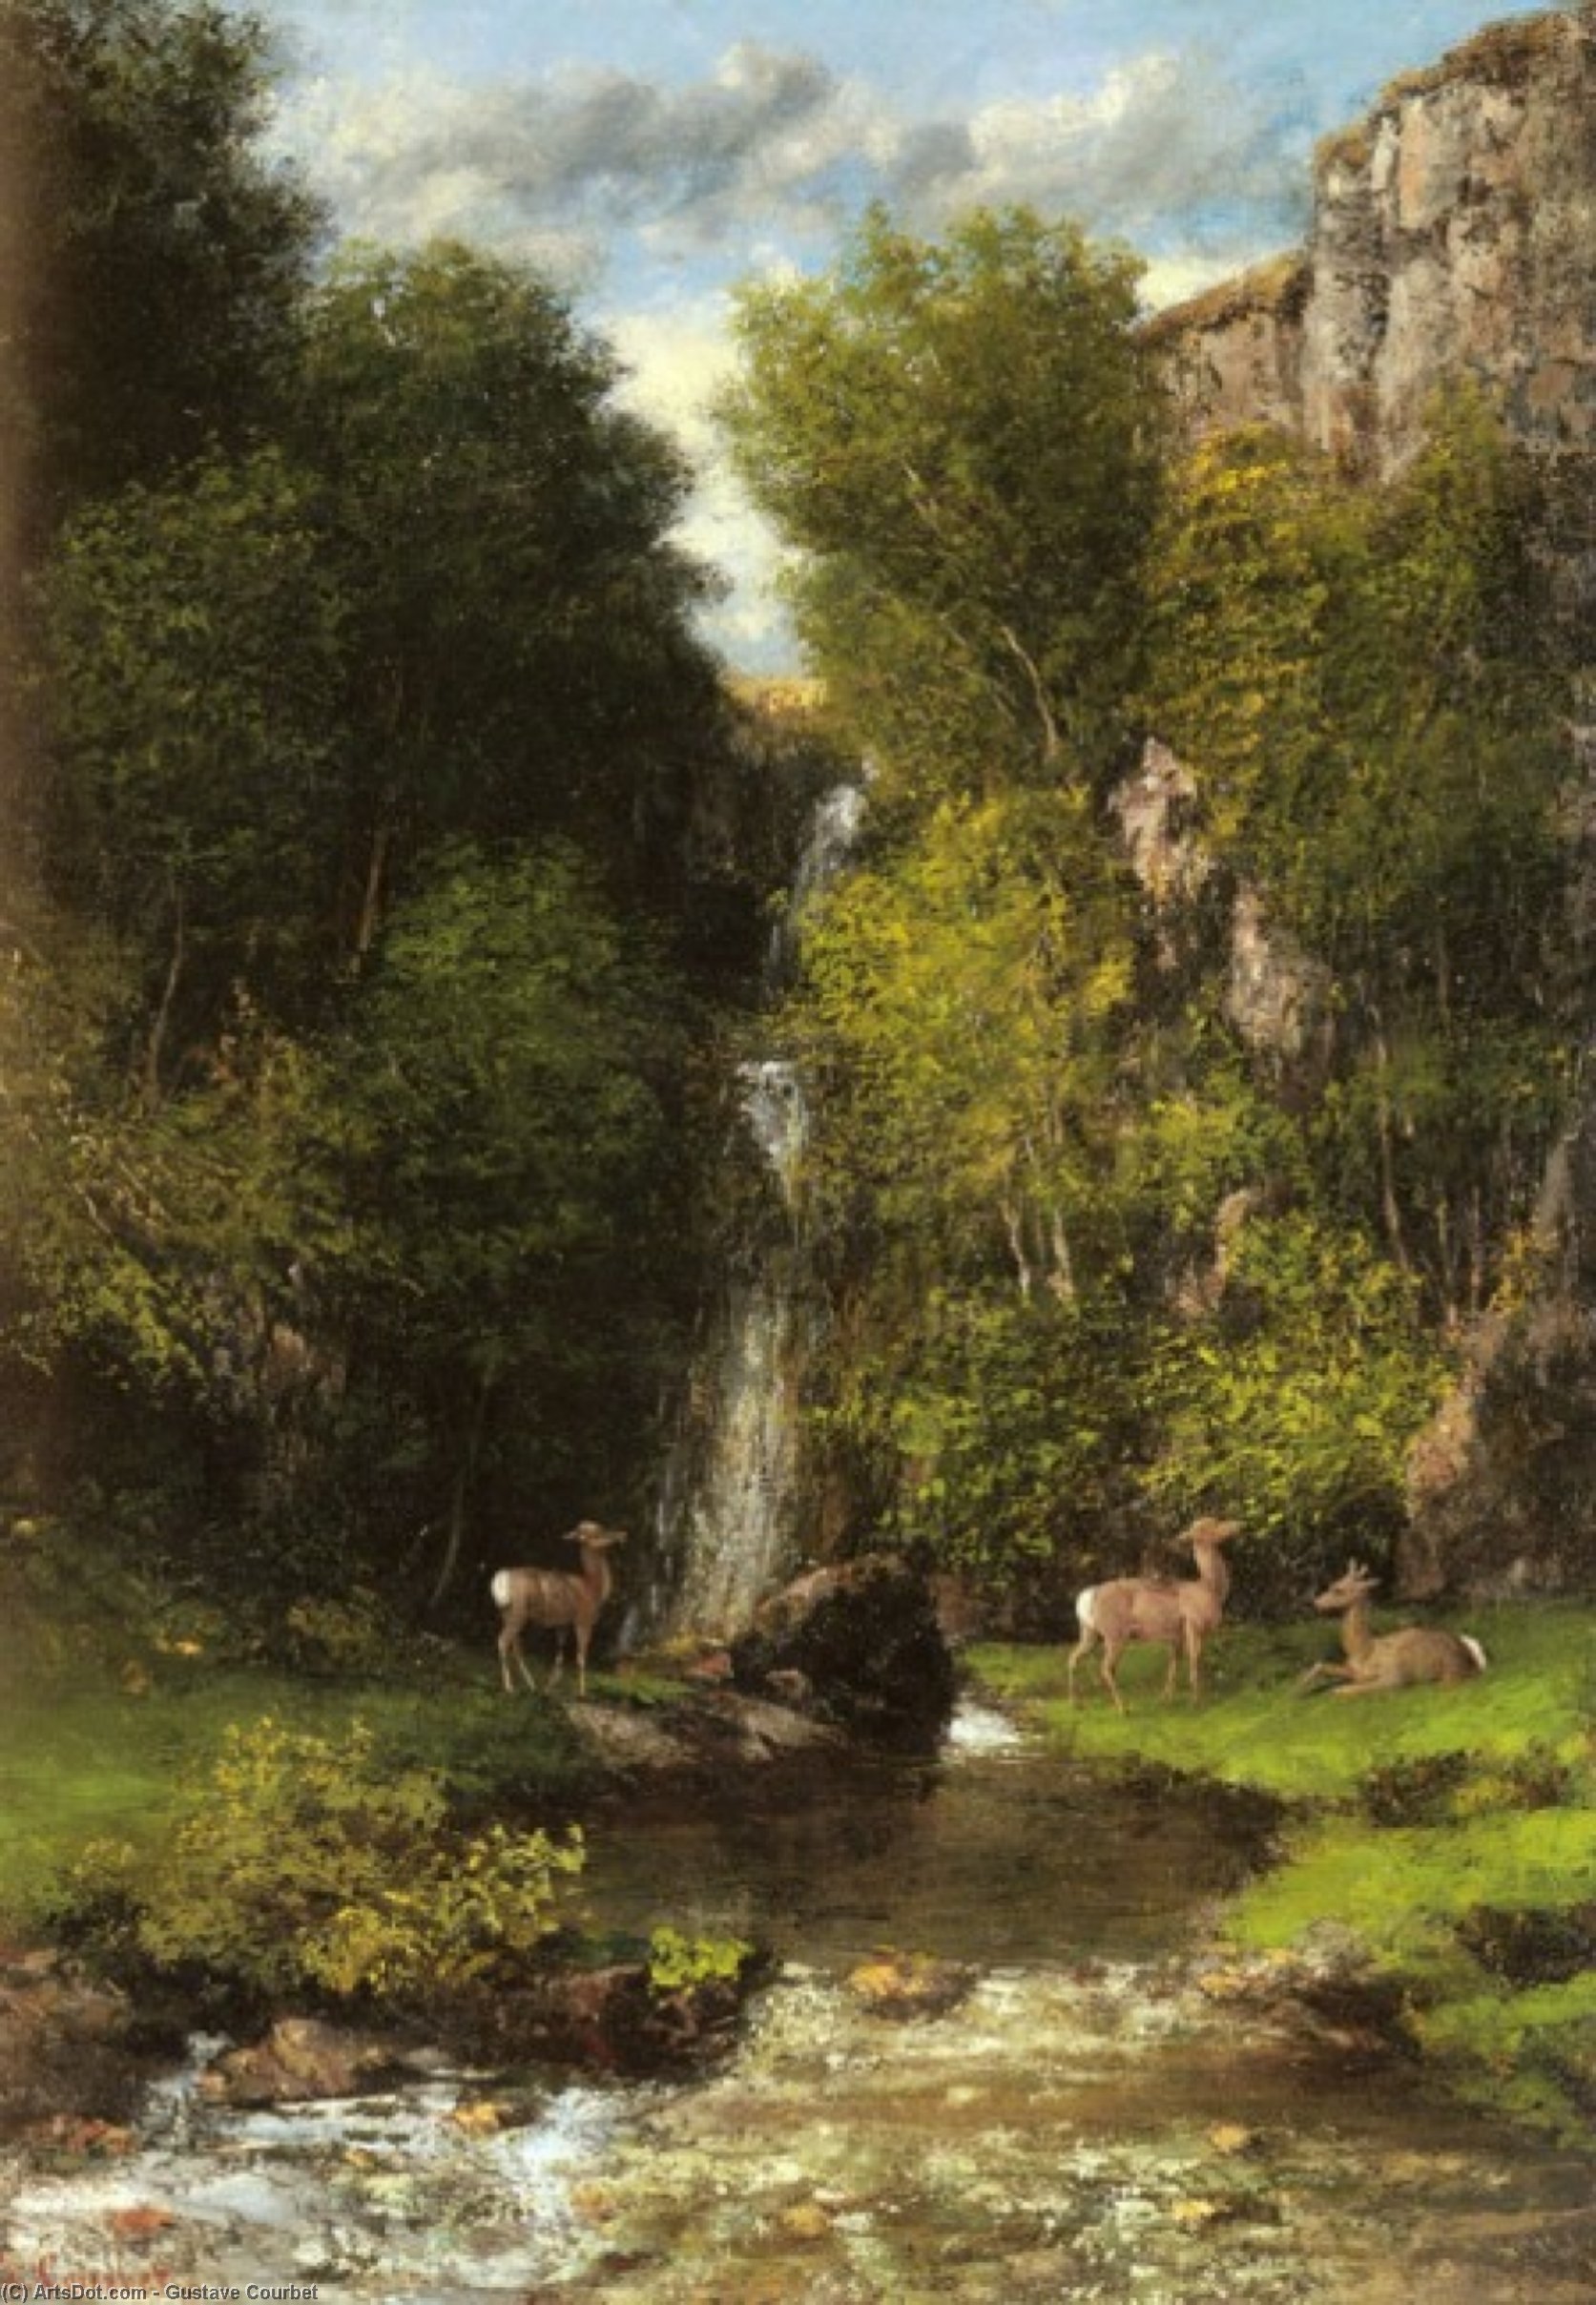 WikiOO.org - دایره المعارف هنرهای زیبا - نقاشی، آثار هنری Gustave Courbet - A Family of Deer in a Landscape with a Waterfall